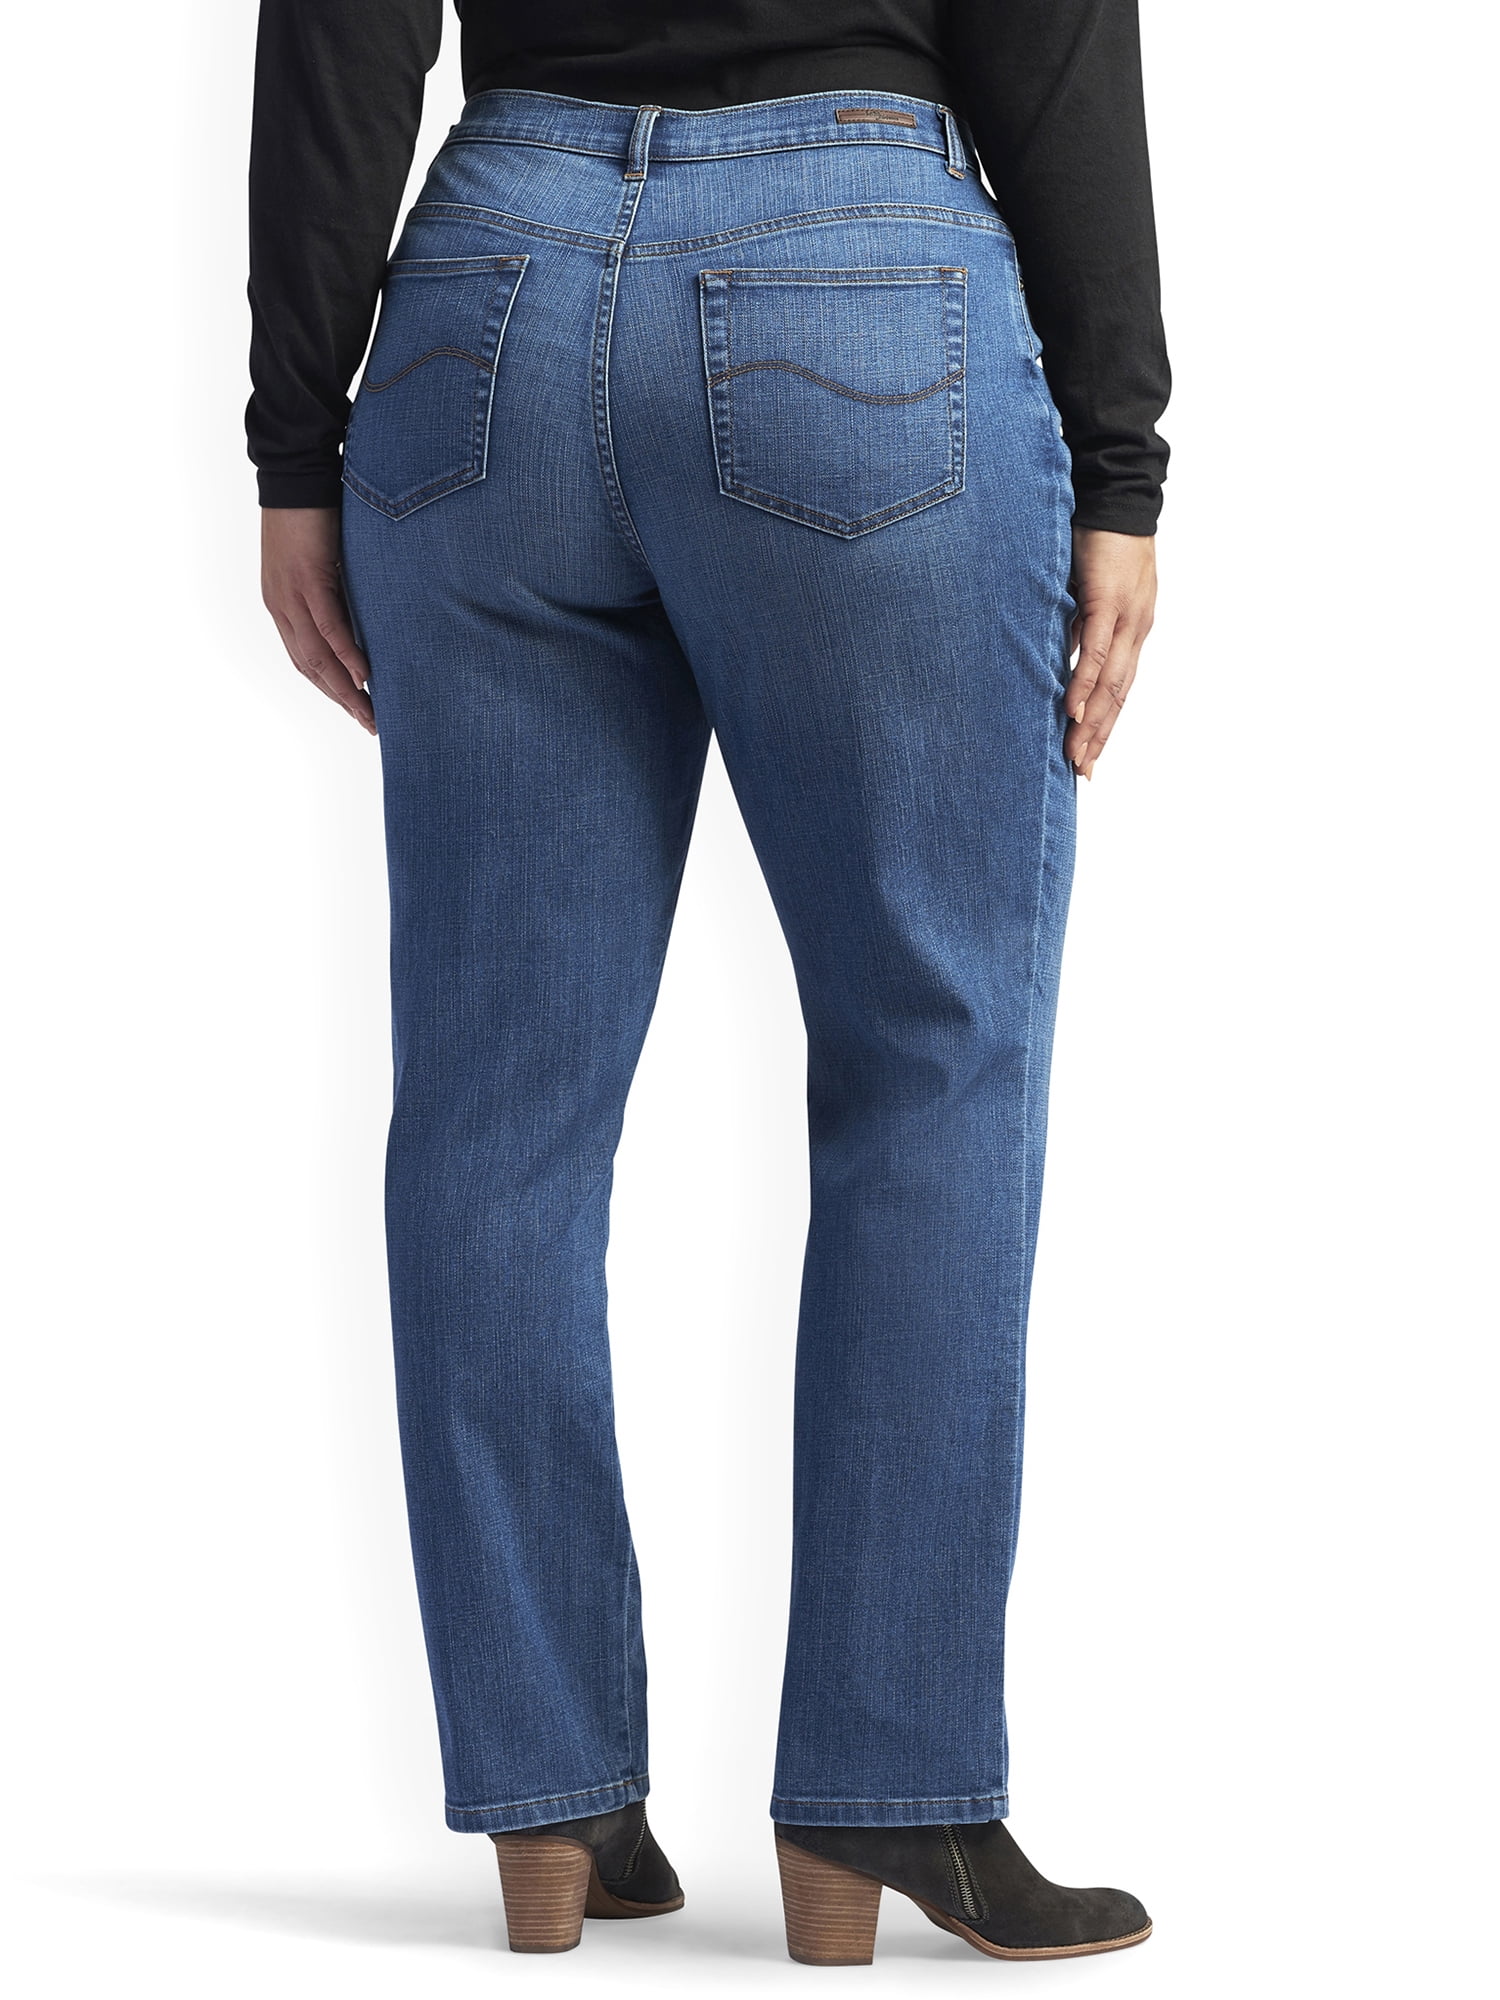 Integrere monarki Stolthed Lee Womens's Plus Stretch Relaxed Fit Straight Leg Jean - Walmart.com